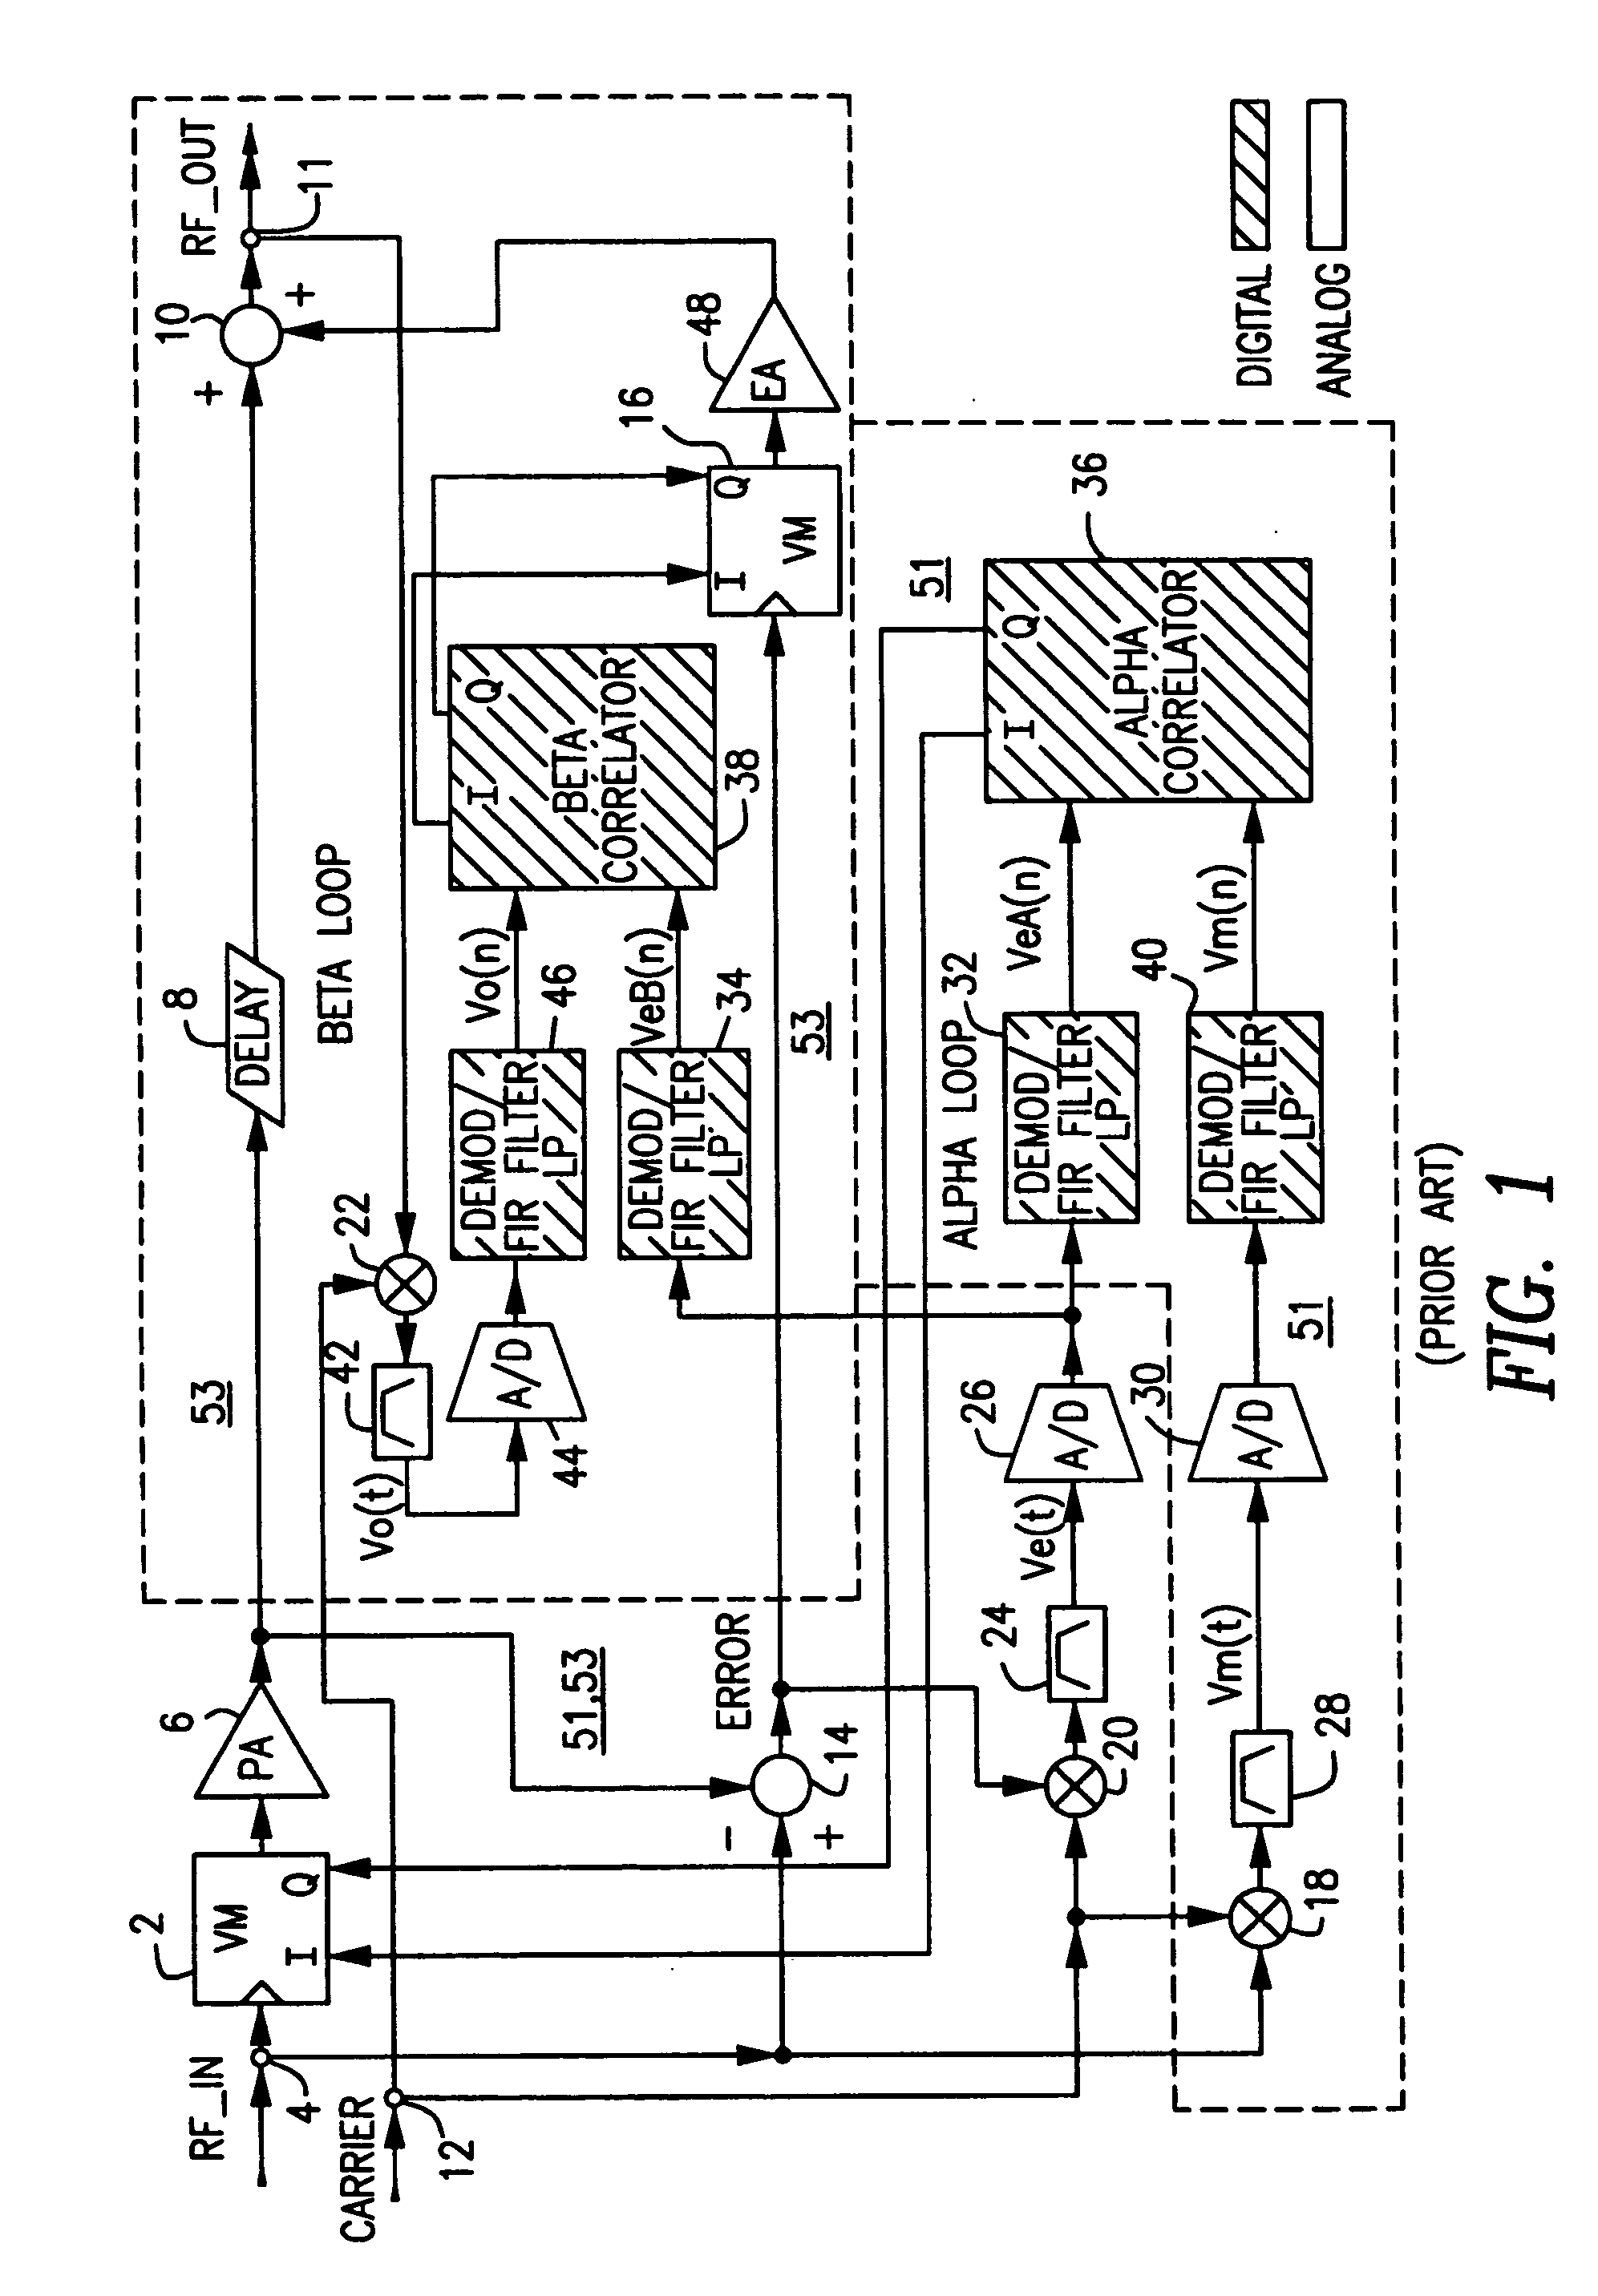 Method and apparatus for feed forward linearization of wideband RF amplifiers